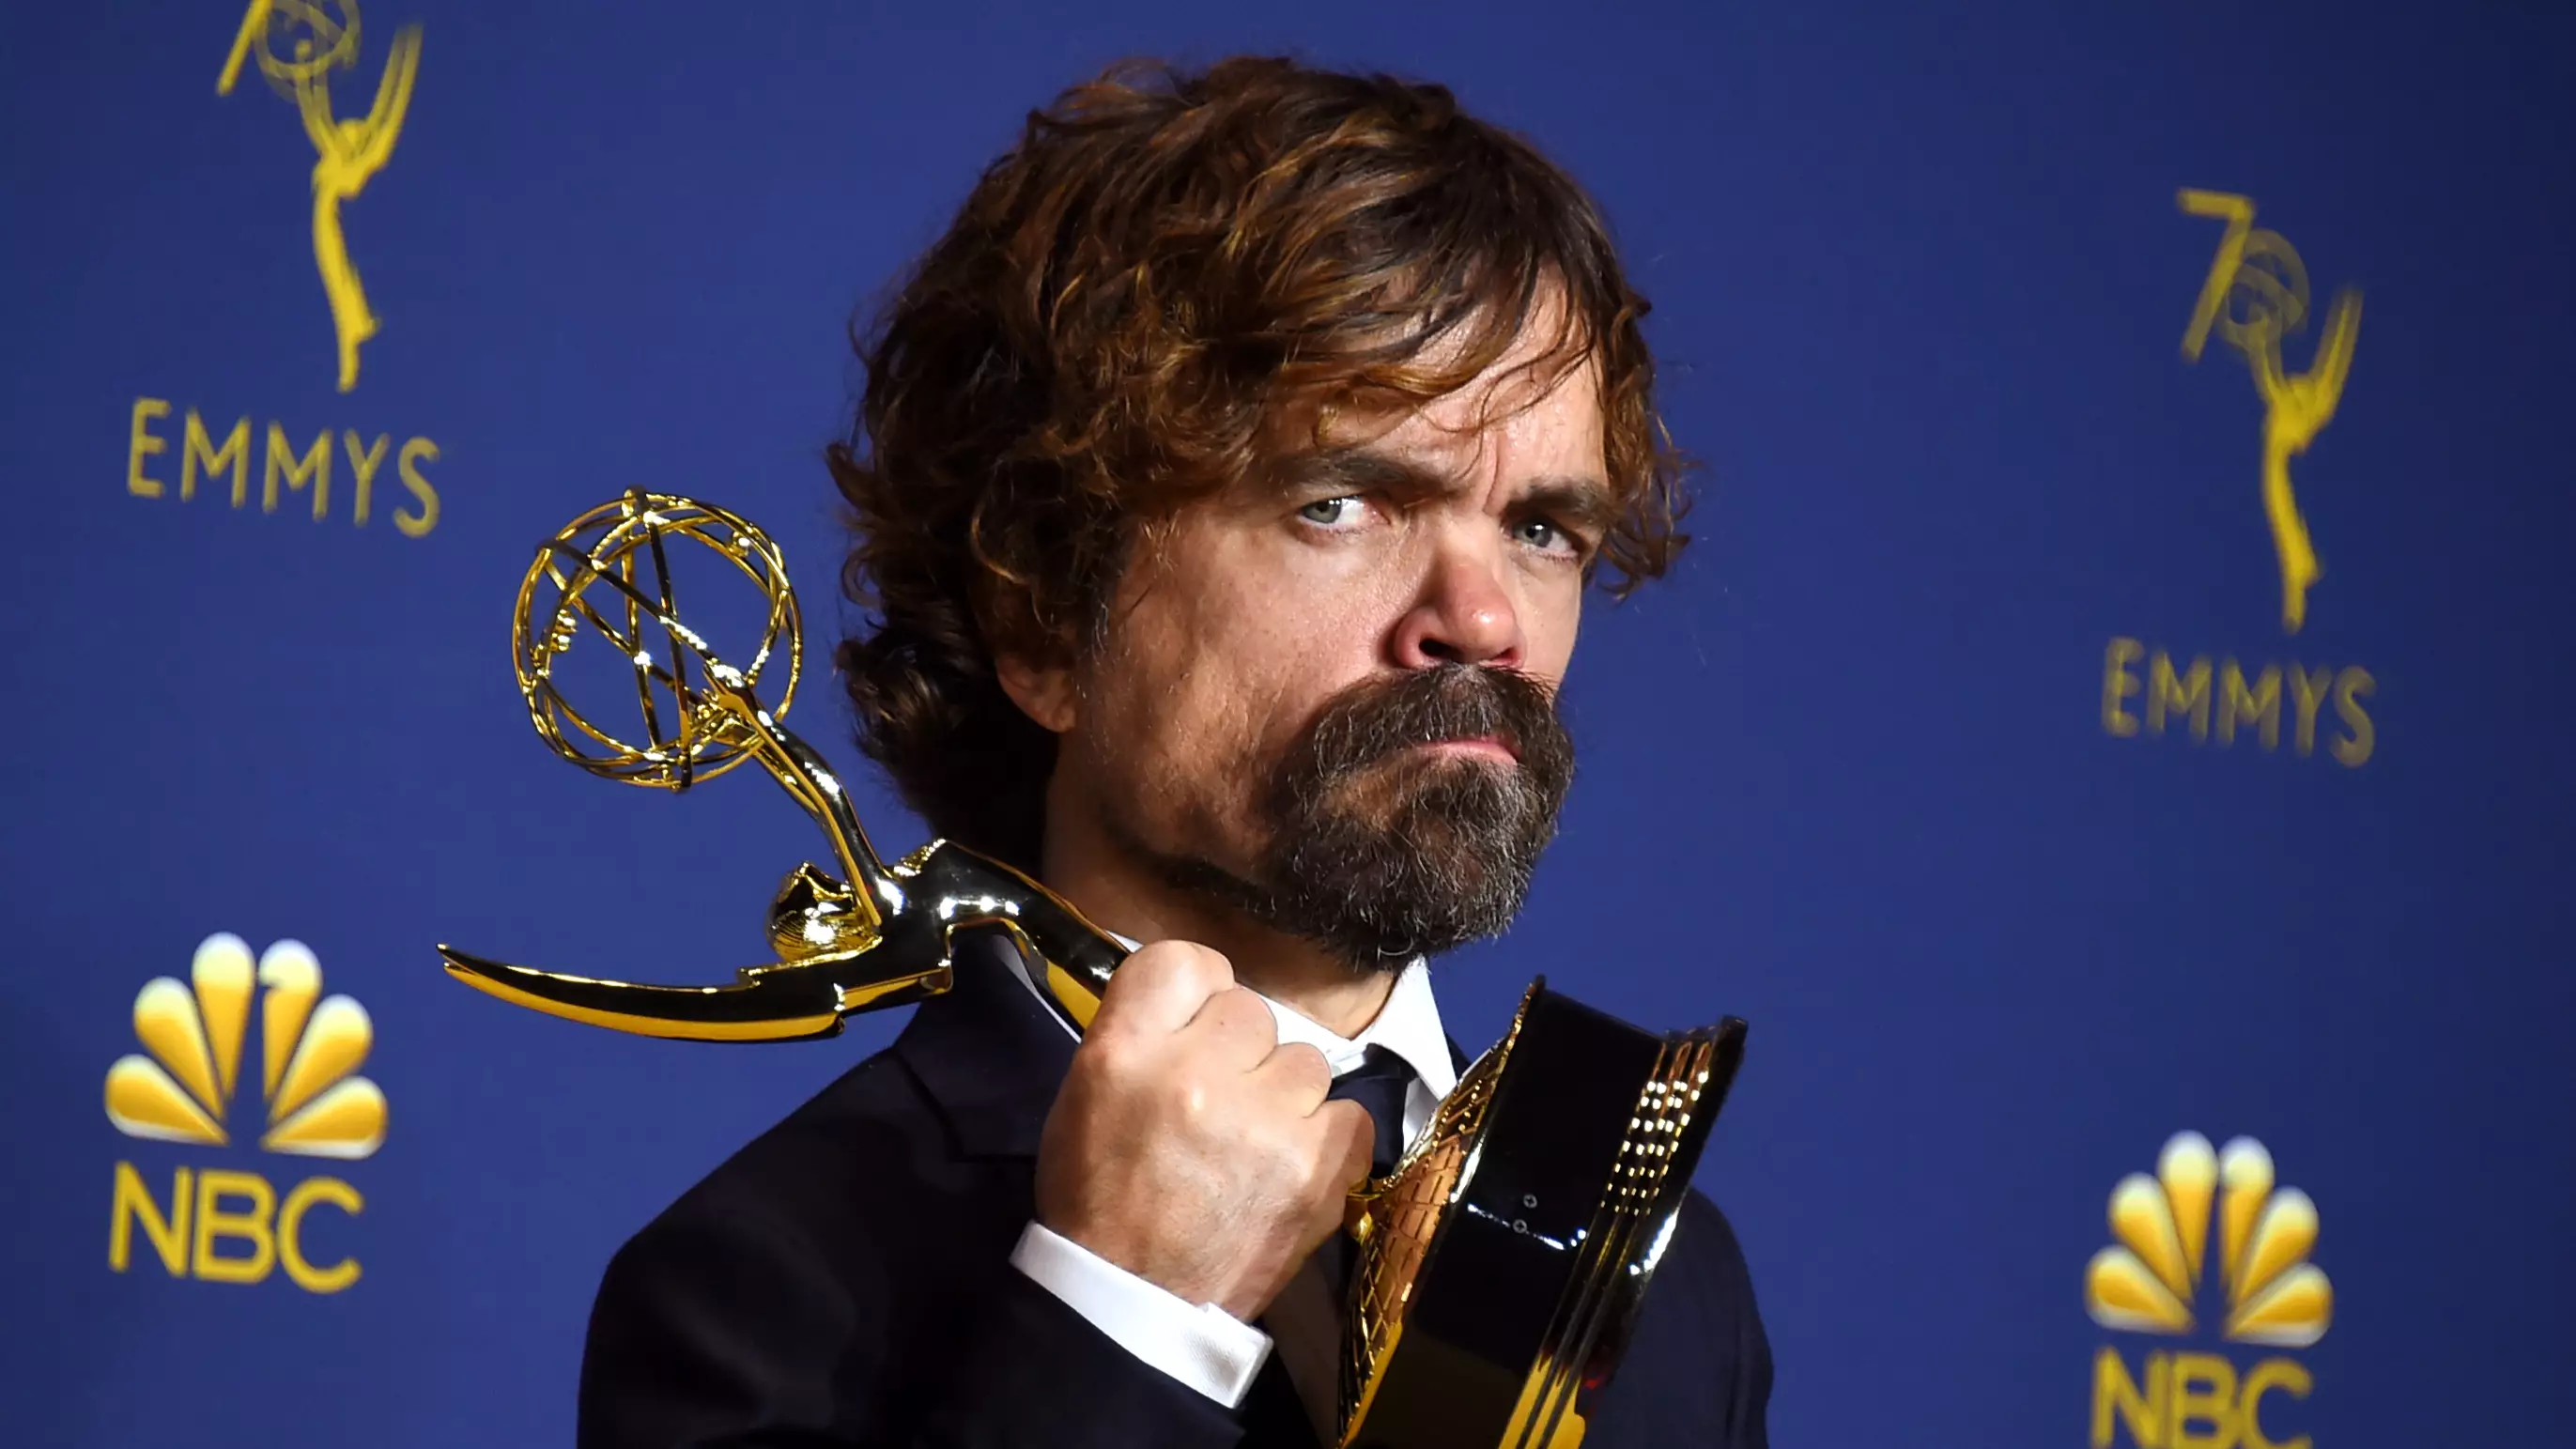 Peter Dinklage Likes Pretending He's Dead On 'Game Of Thrones' Set - Don't We All?